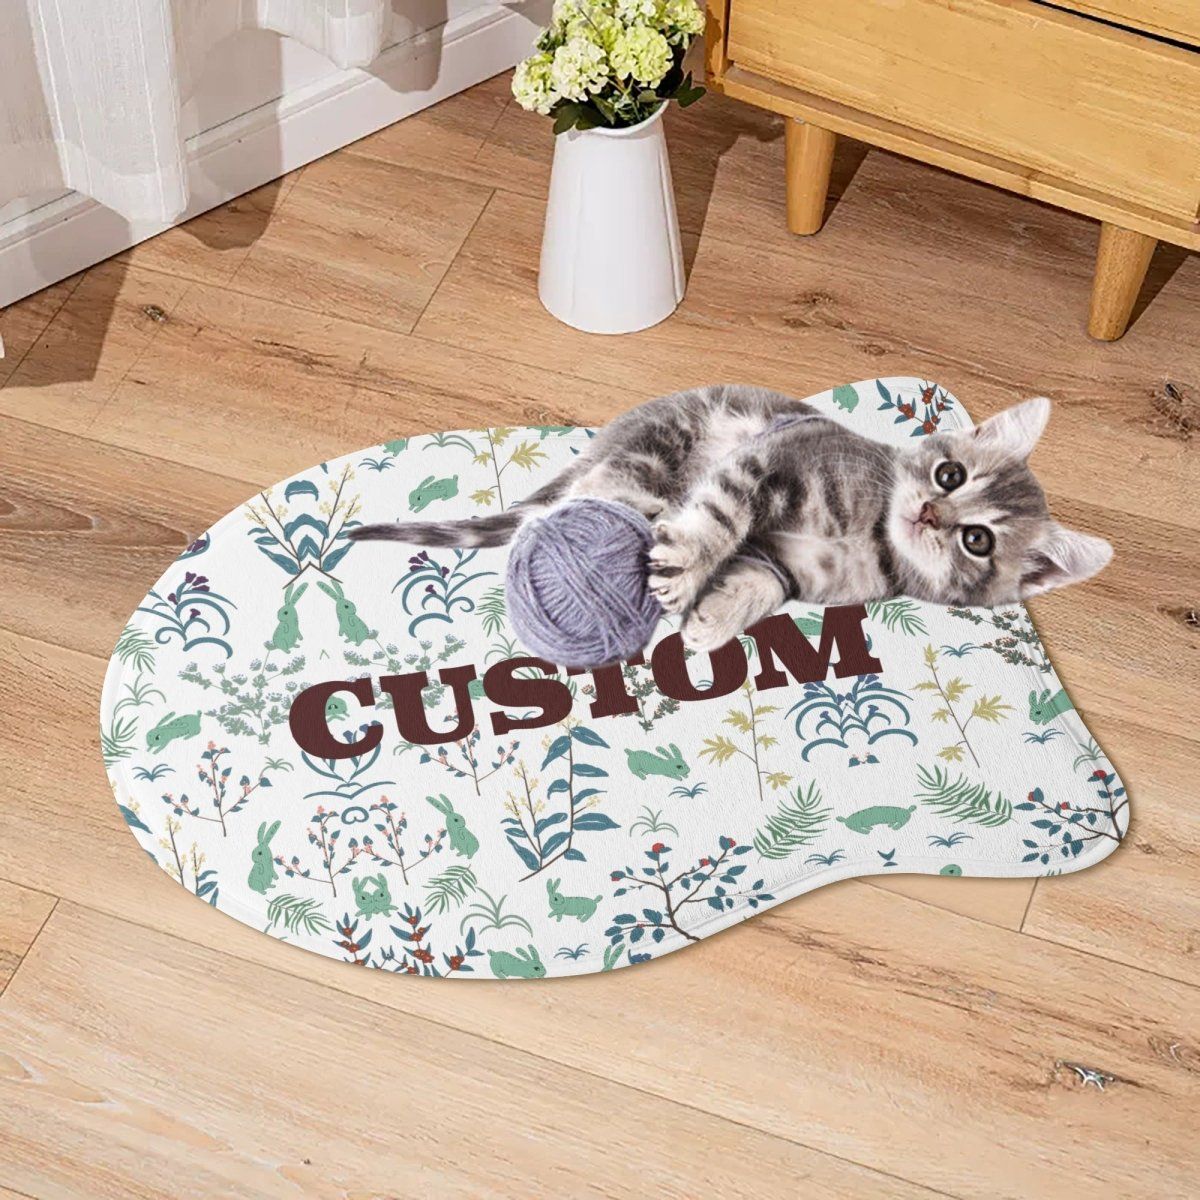 Cute Personalized Paws Pet Rug - Iron Phoenix GHG